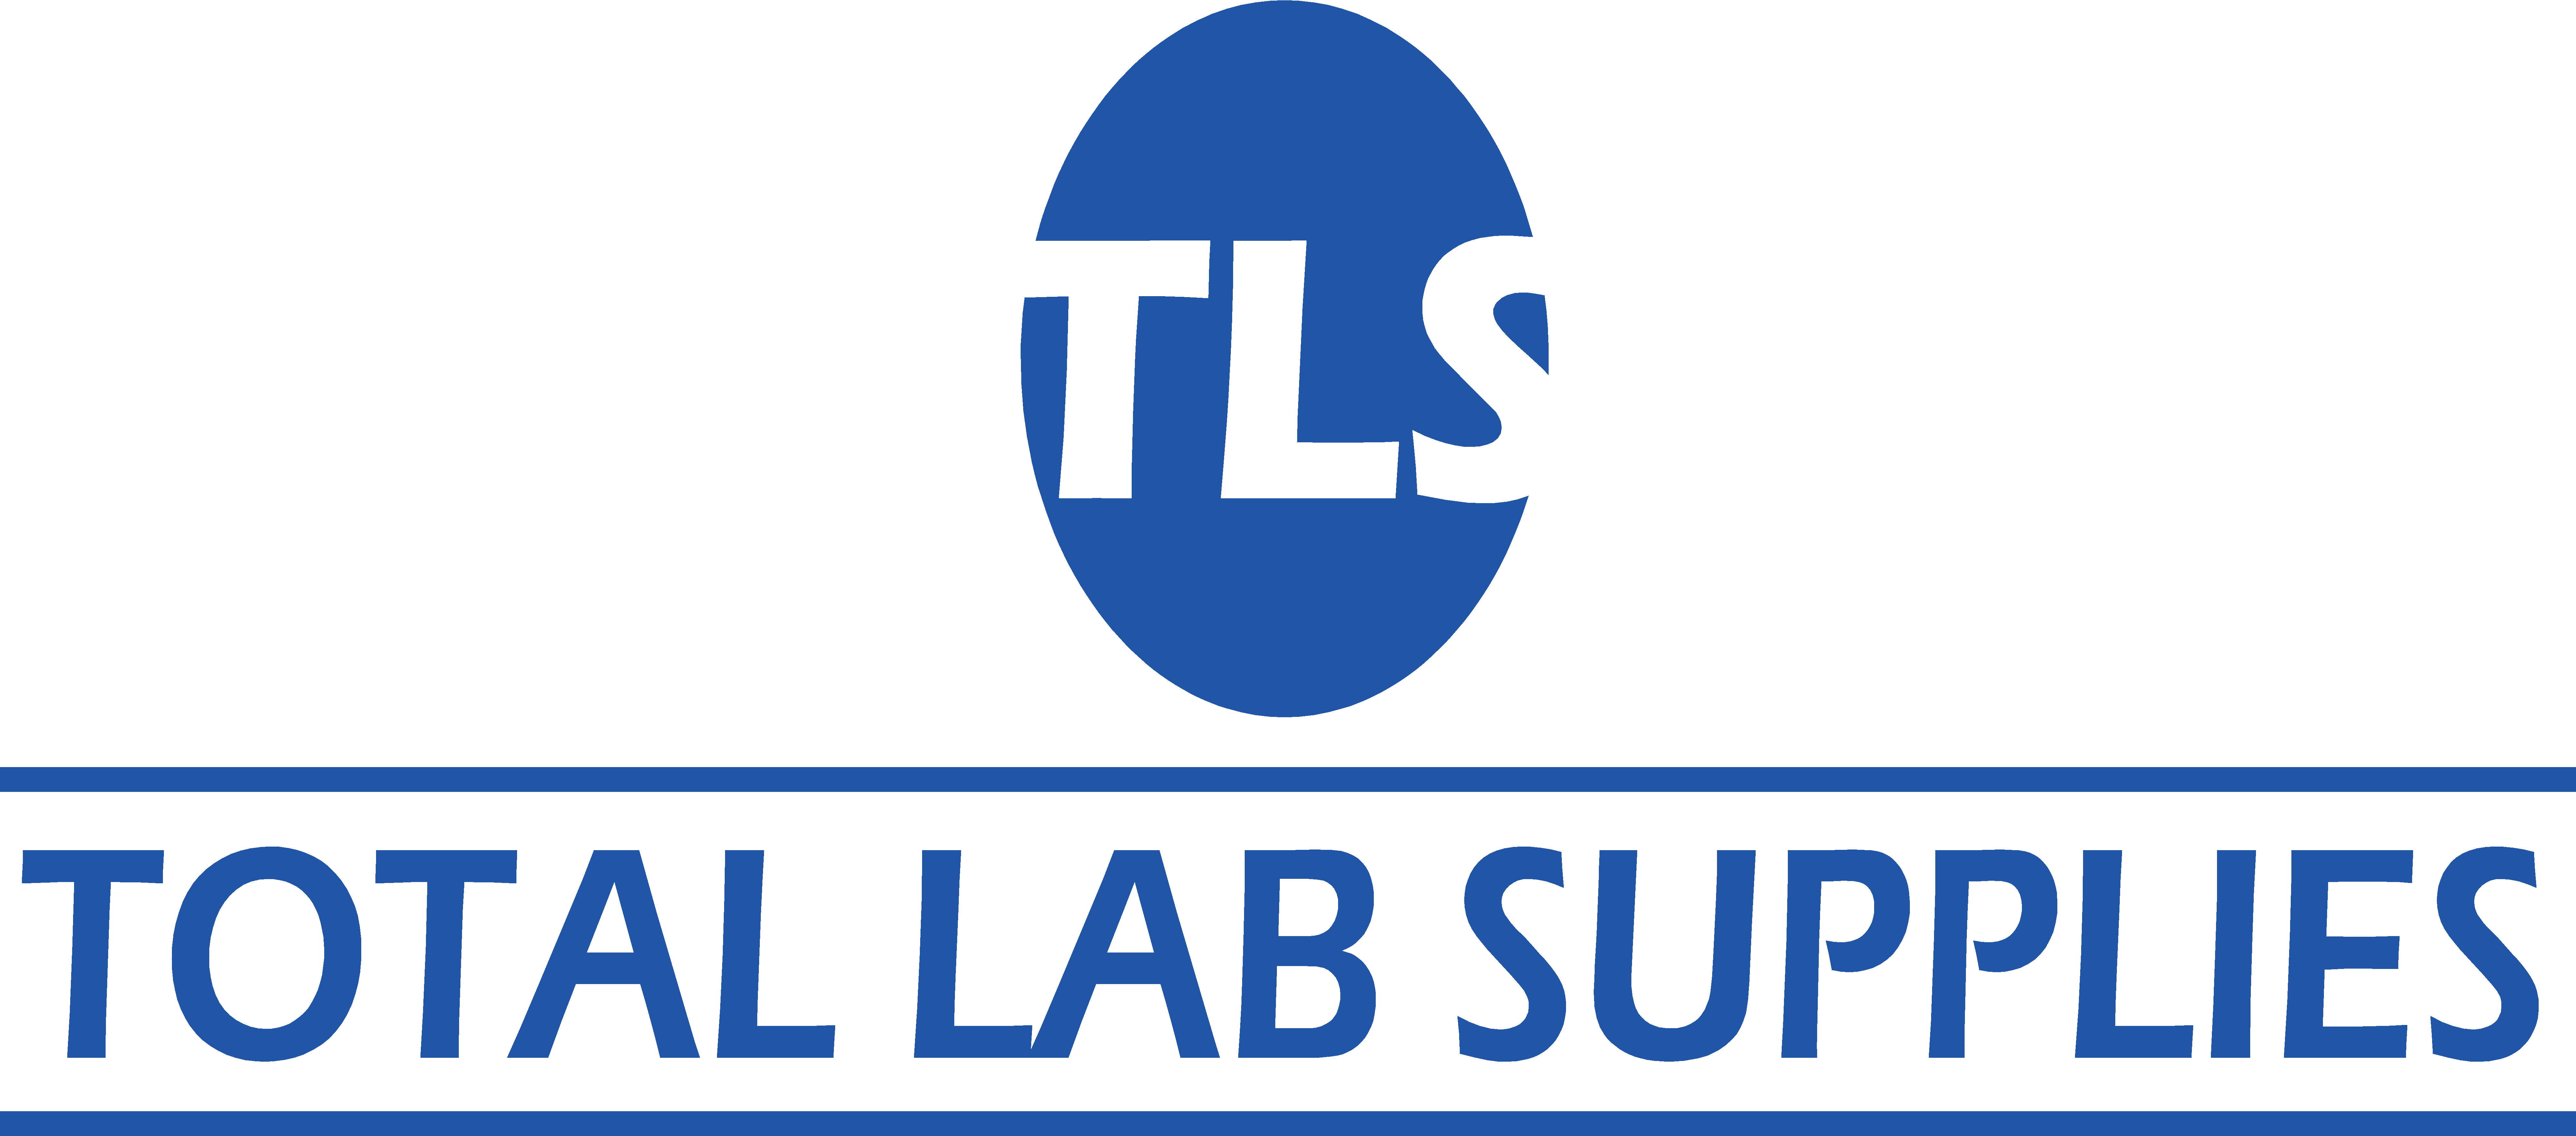 Logo of Total Lab Supplies Laboratory Equipment Instruments And Supplies In St Helens, Merseyside